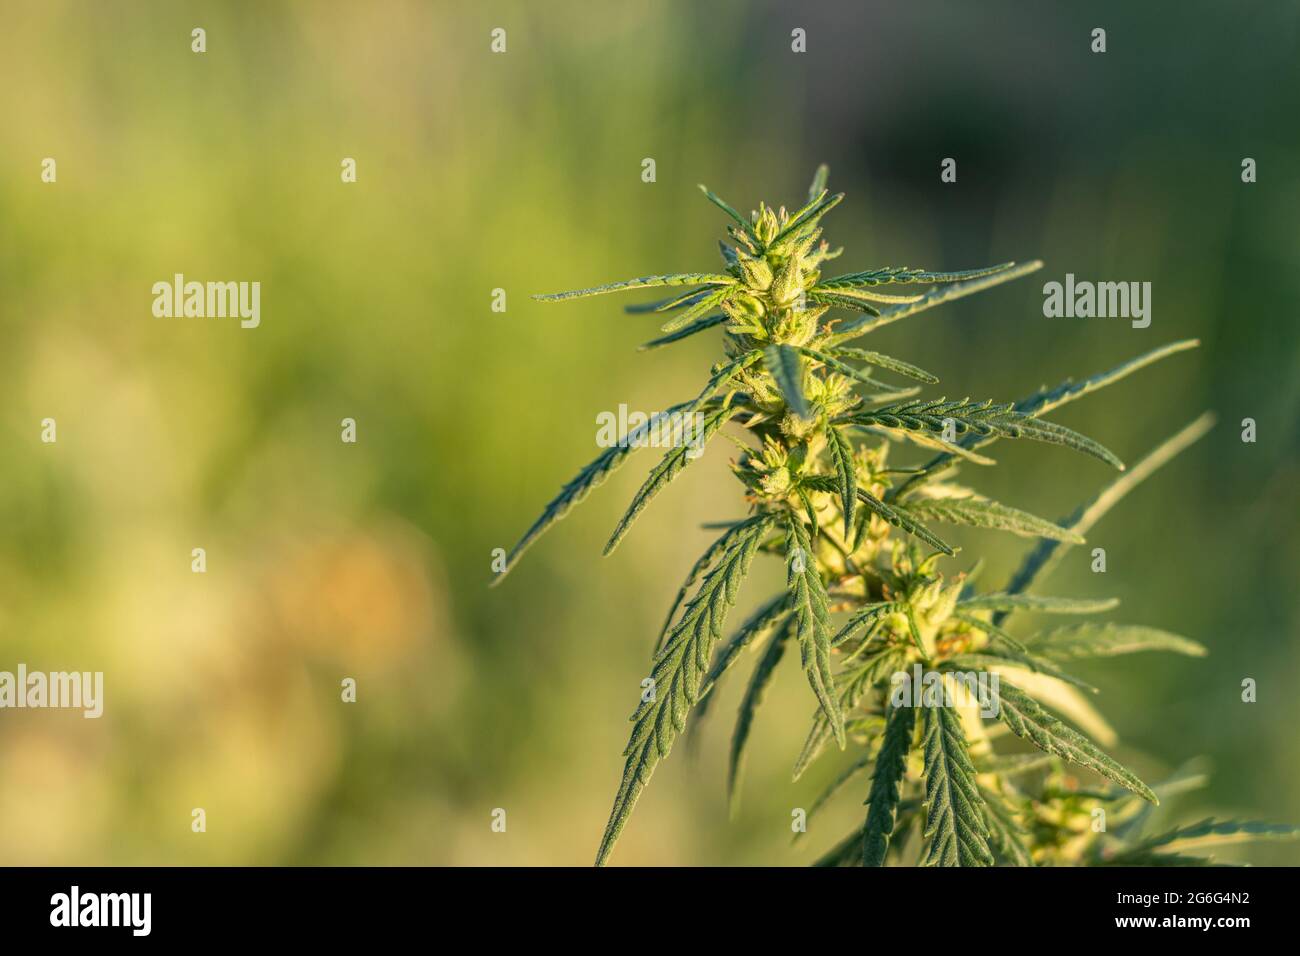 The tip of the marijuana during flowering. The background is blurred Stock Photo